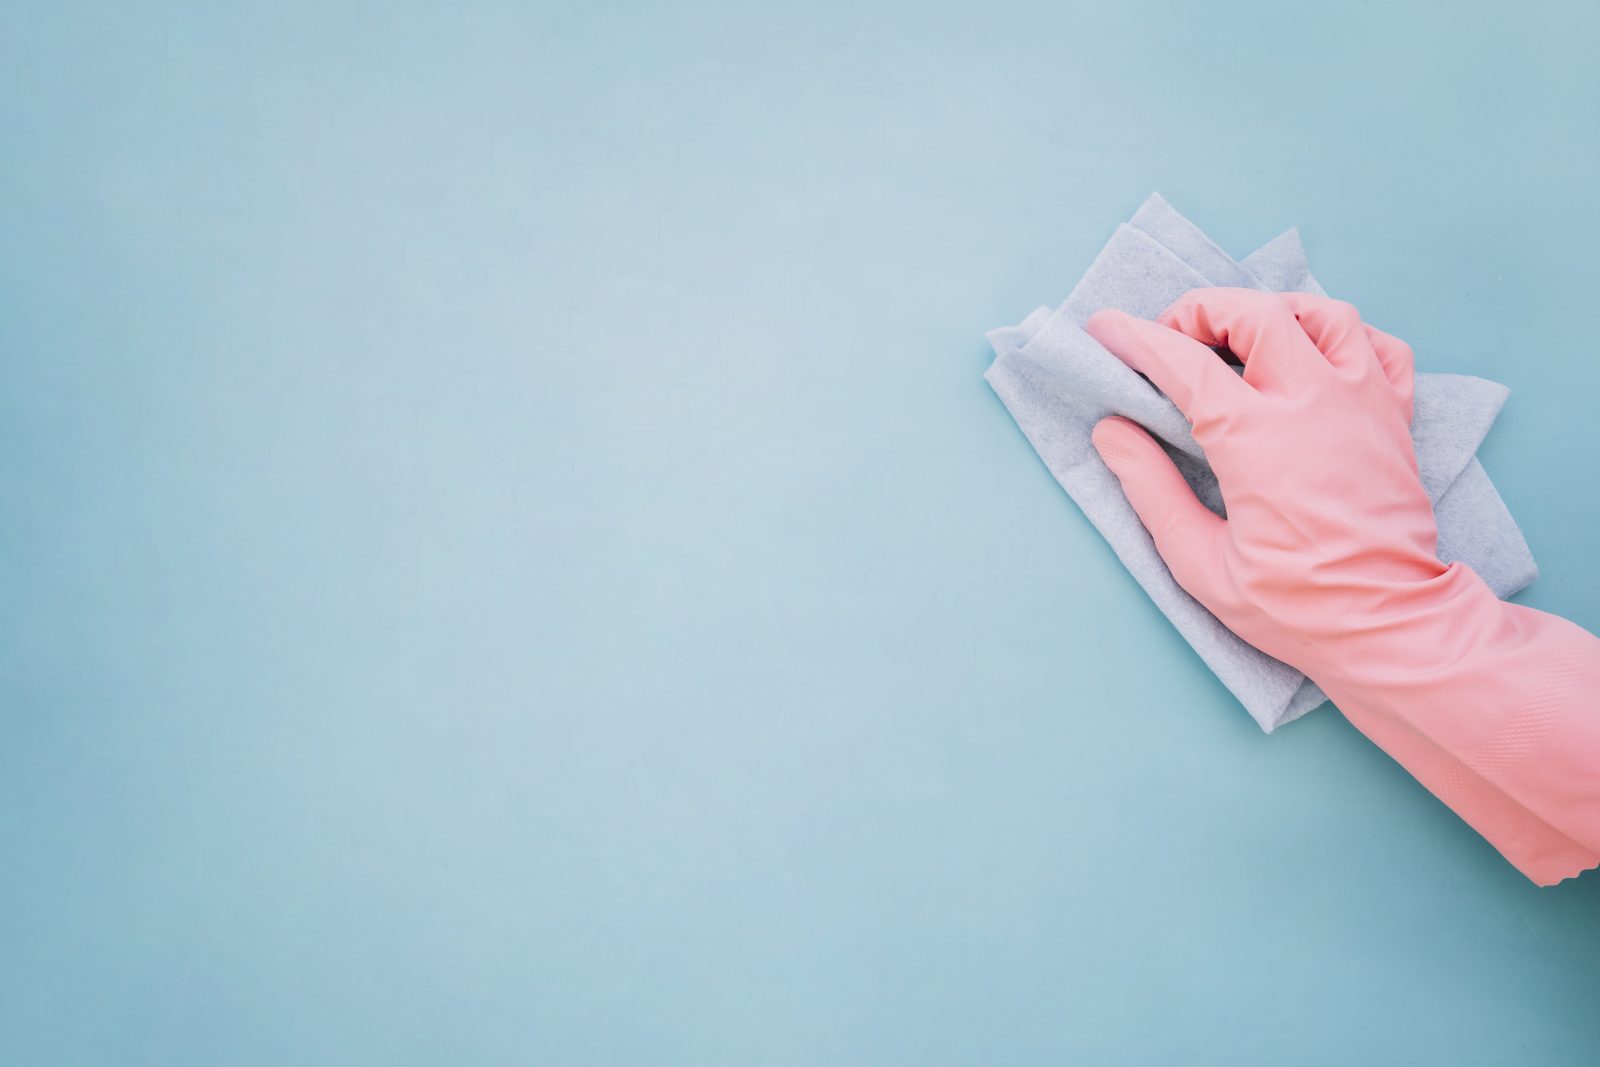 Cleaning labplus - How to choose work gloves?